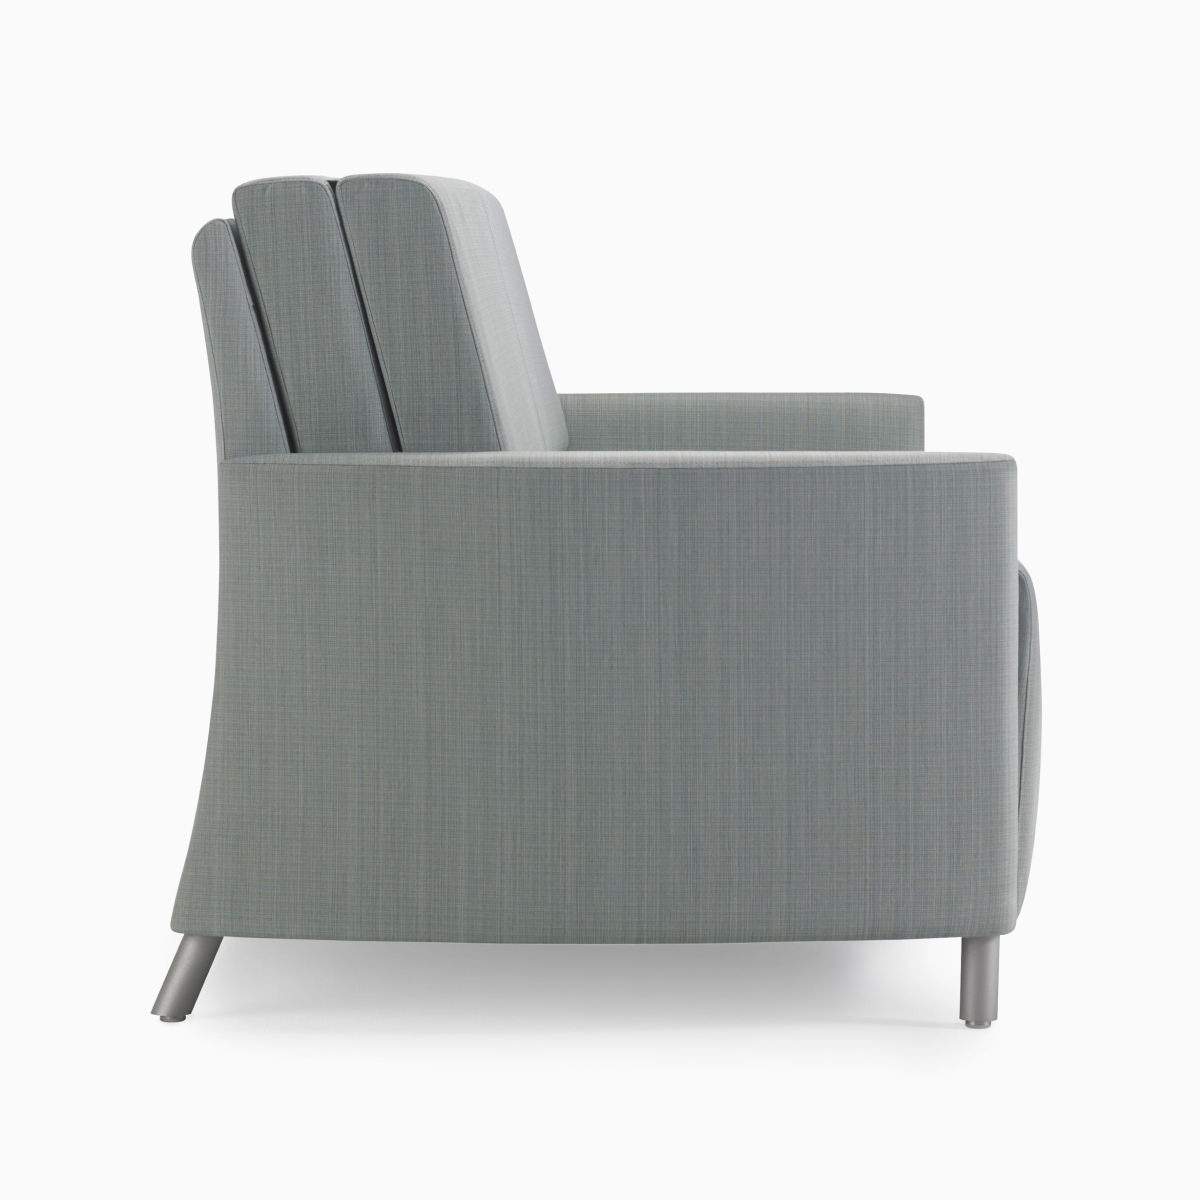 Side view of a Nemschoff Pamona Flop Sofa in gray textile with wall-saver metal legs.